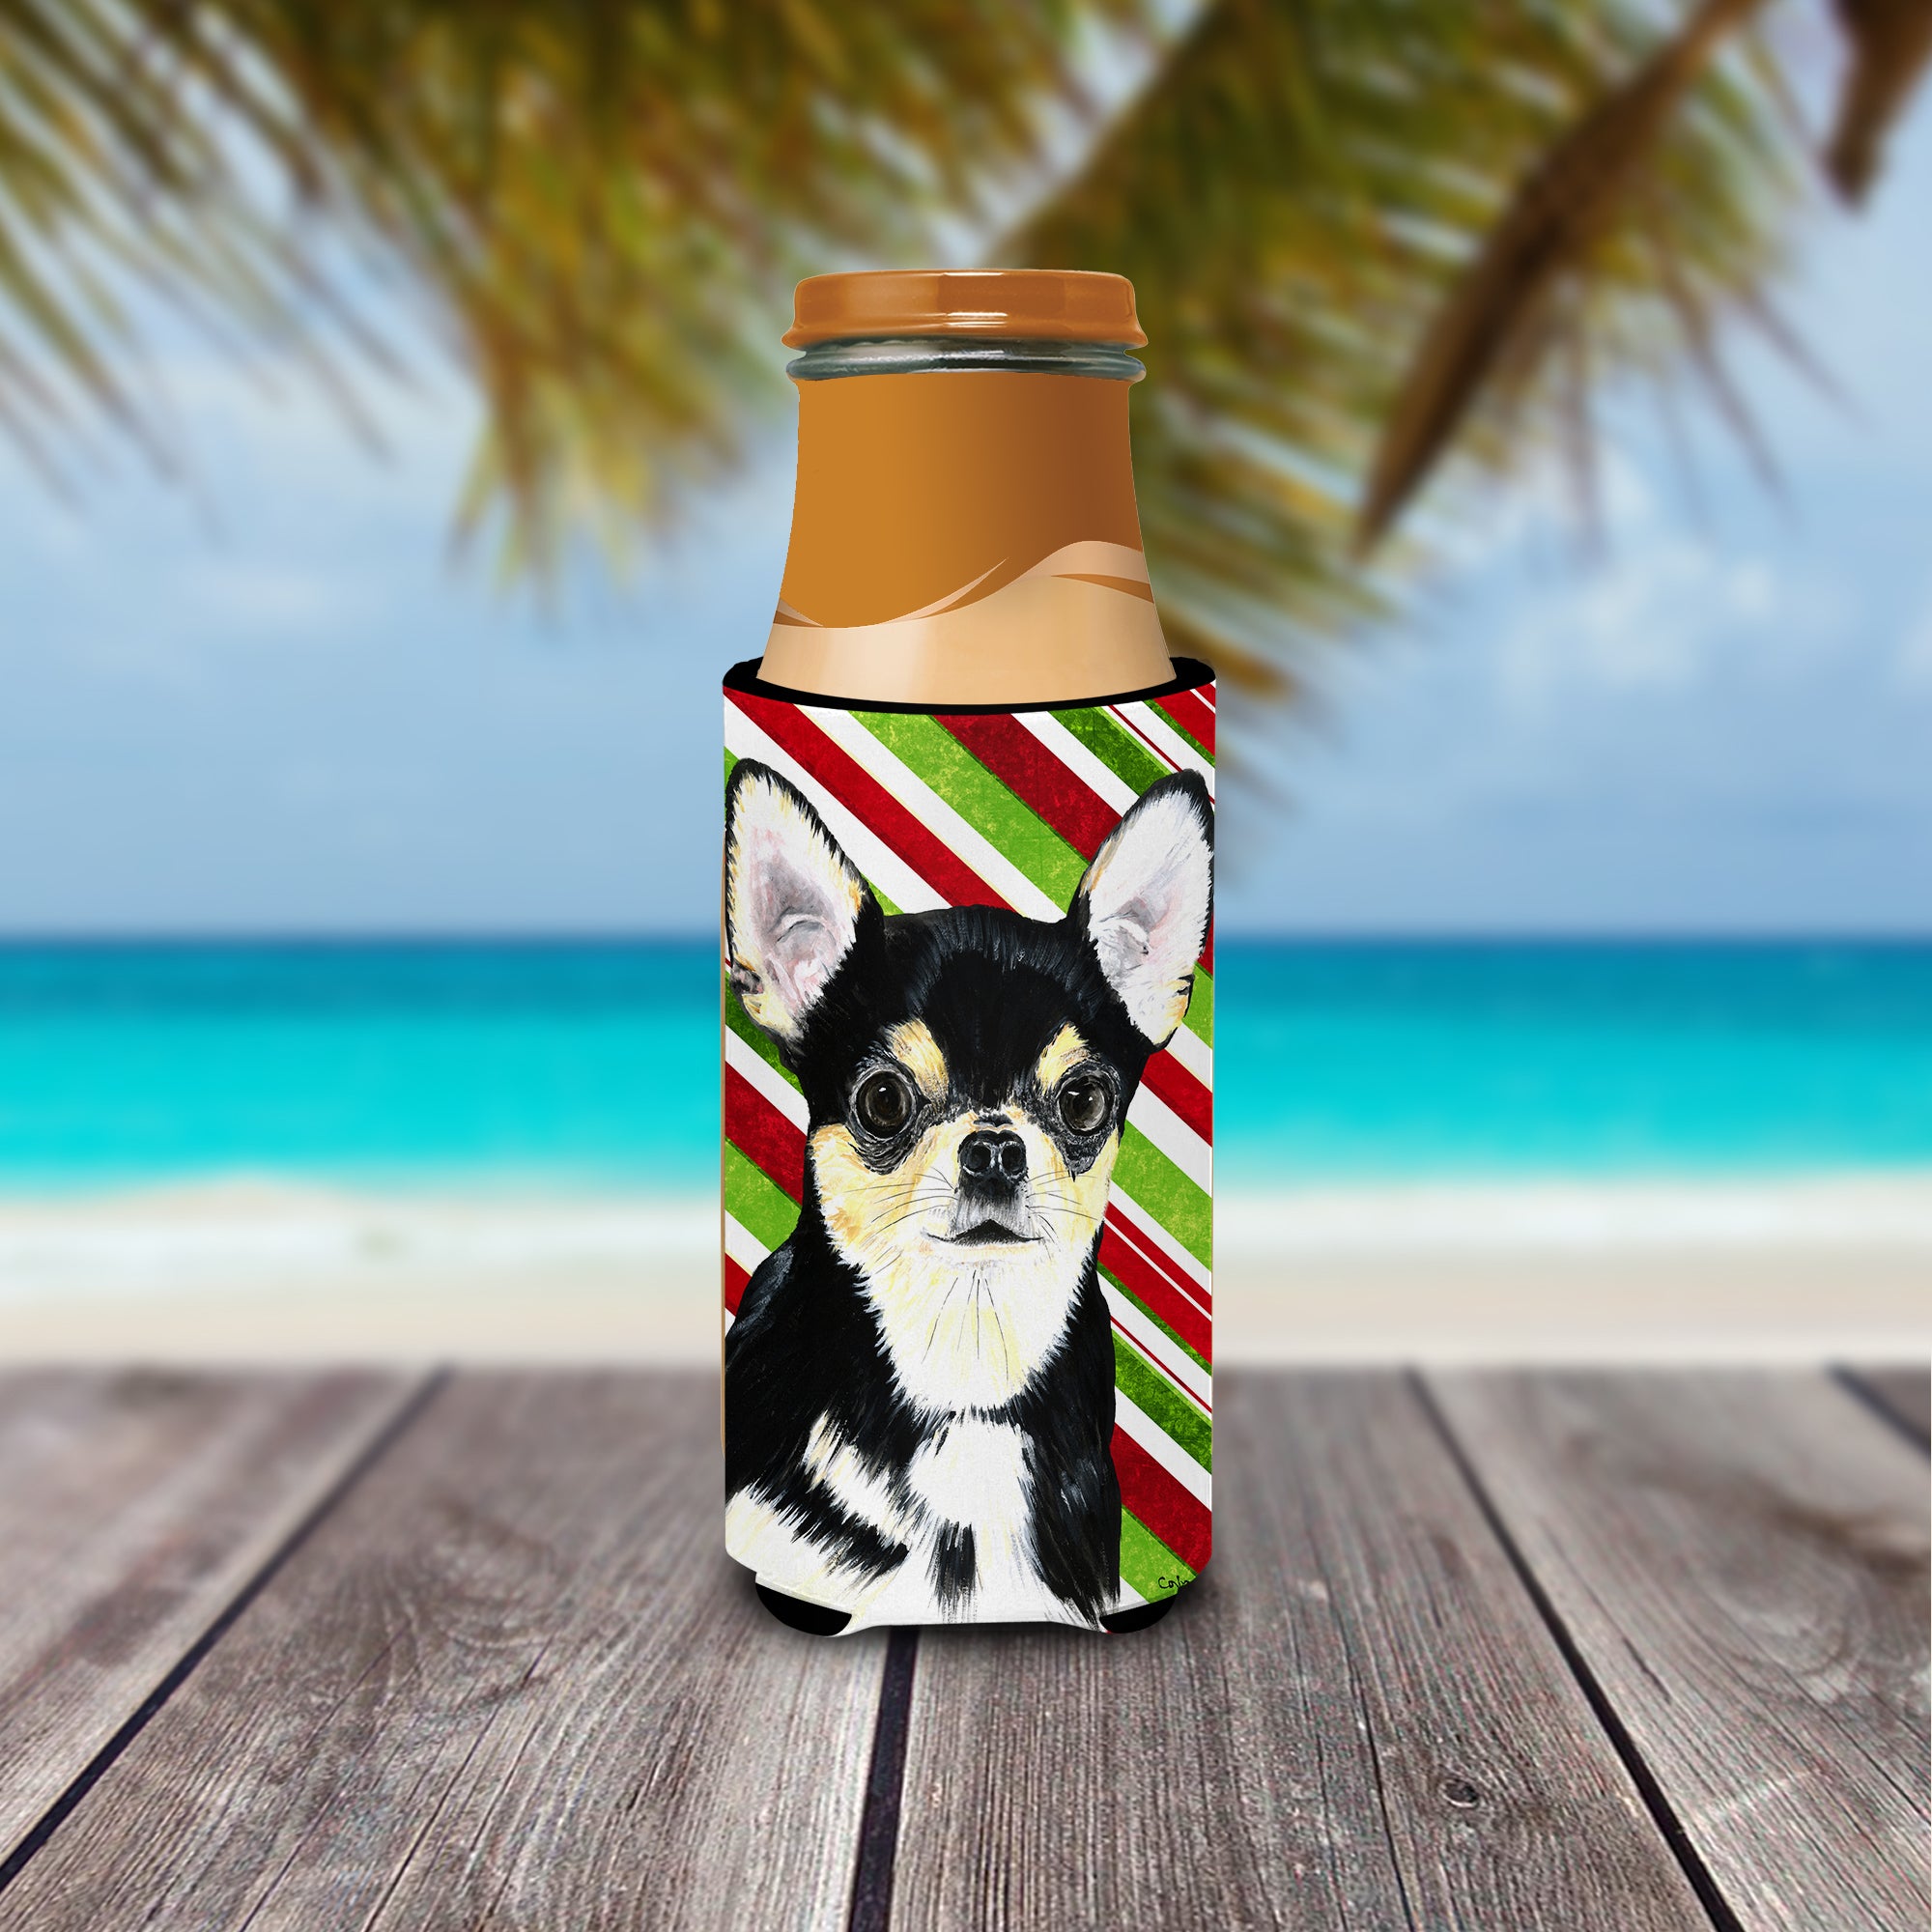 Chihuahua Candy Cane Holiday Christmas Ultra Beverage Insulators for slim cans SC9359MUK.